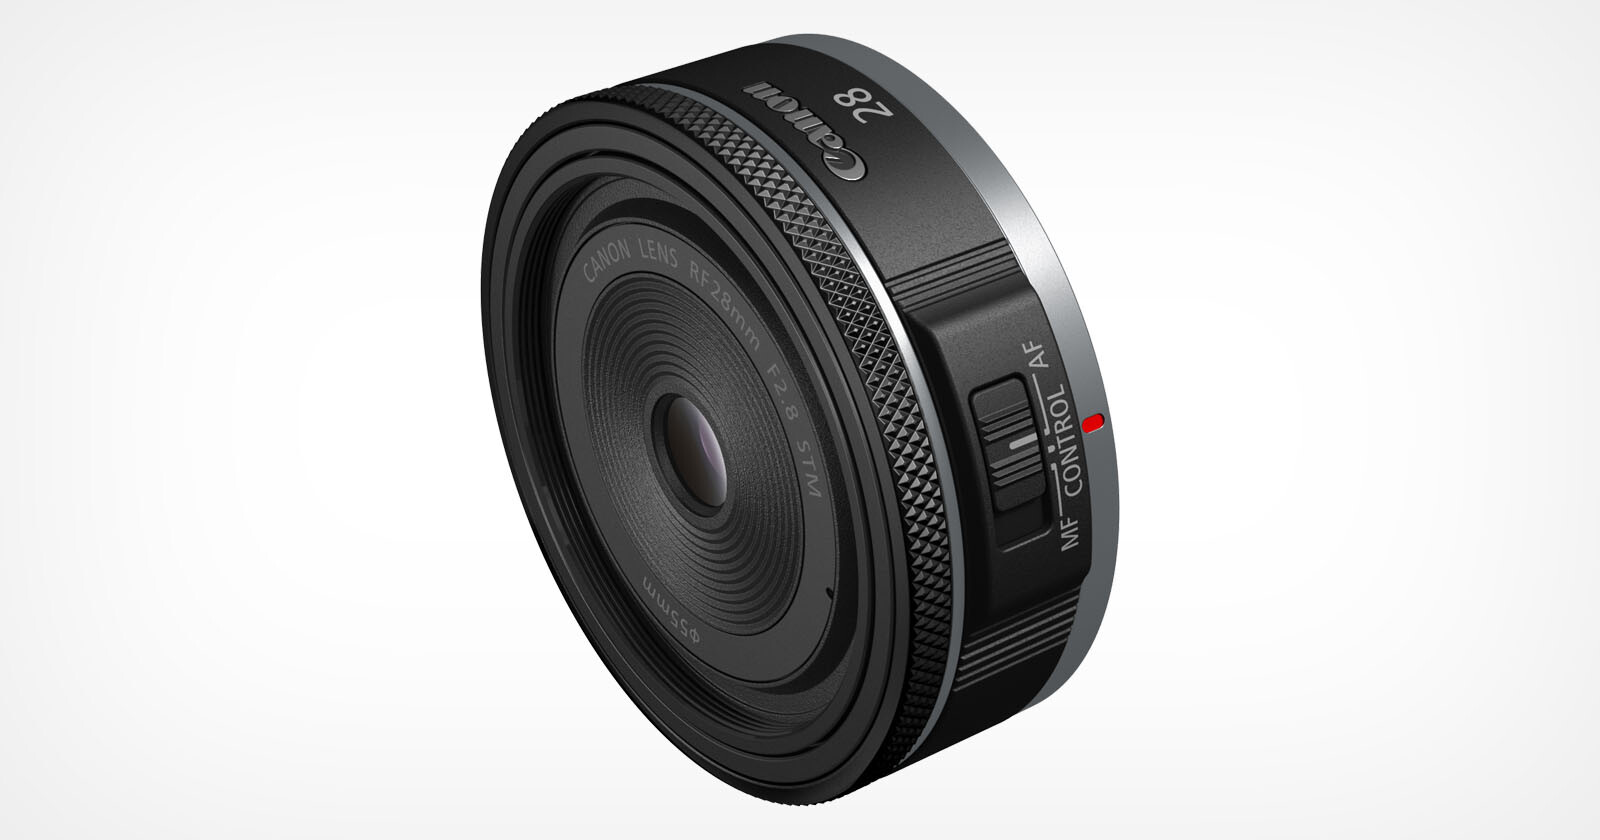 Canon’s 28mm f/2.8 is a New Pancake Lens for RF-Mount